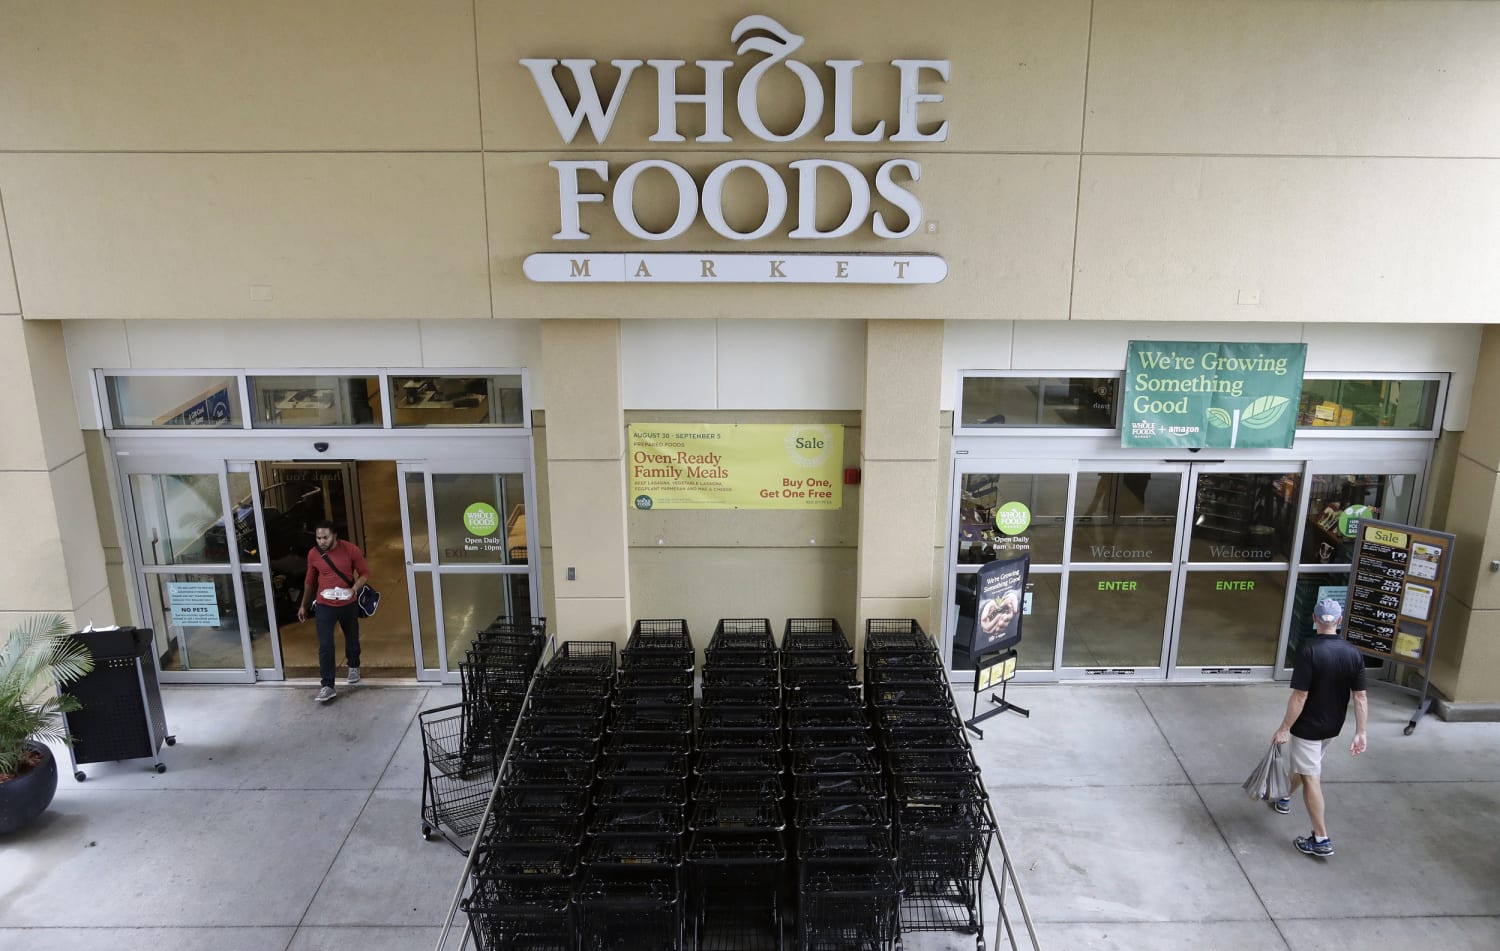 https://media-cldnry.s-nbcnews.com/image/upload/newscms/2017_35/2135111/170828-whole-foods-amazon-tampa-njs-123p.jpg